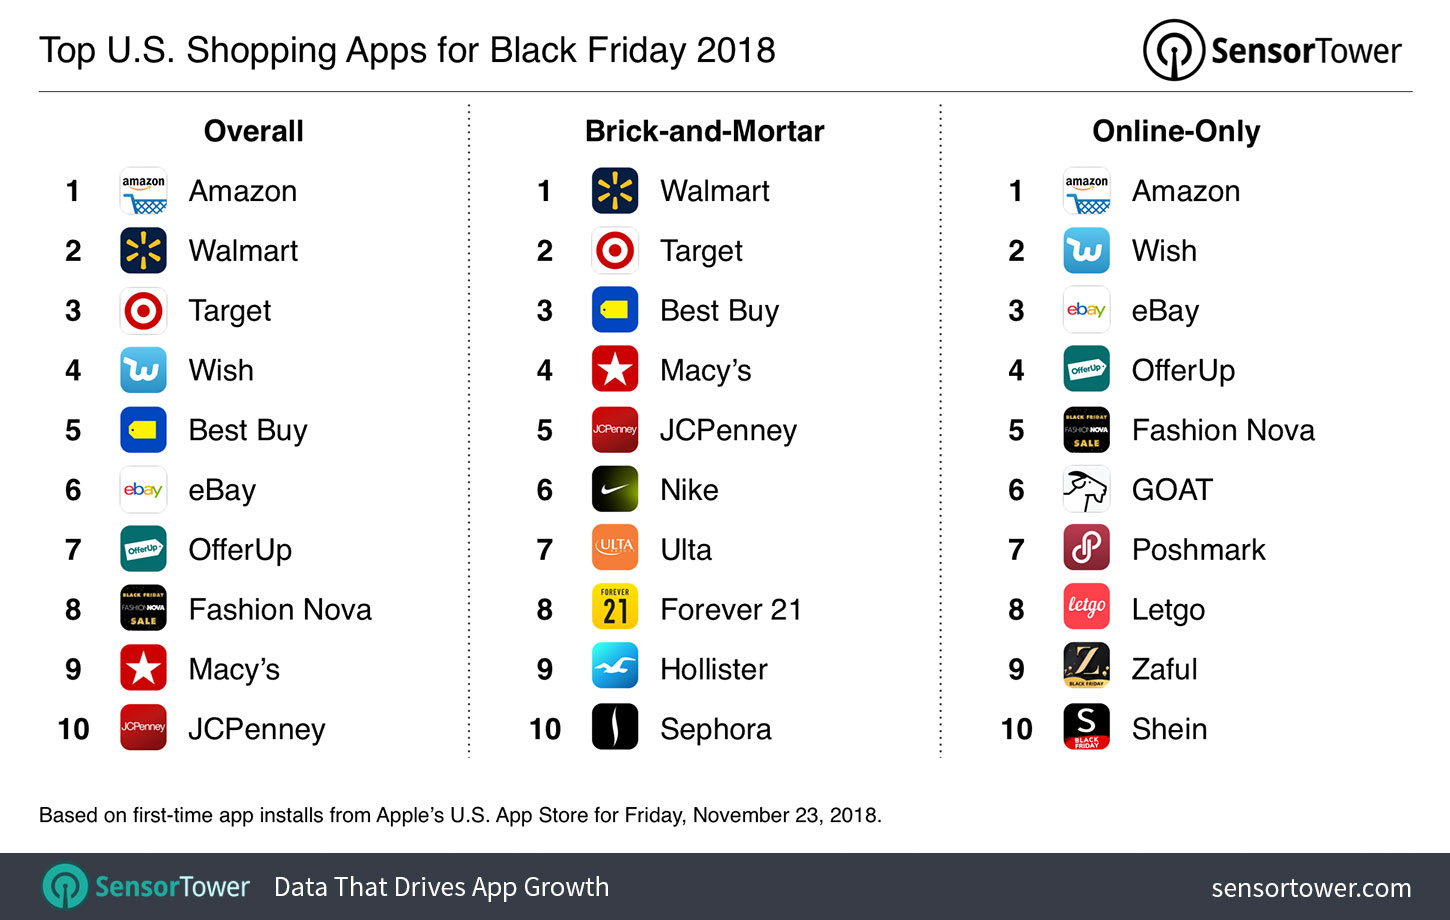 Top Shopping Apps for Black Friday 2018 on the U.S. App Store